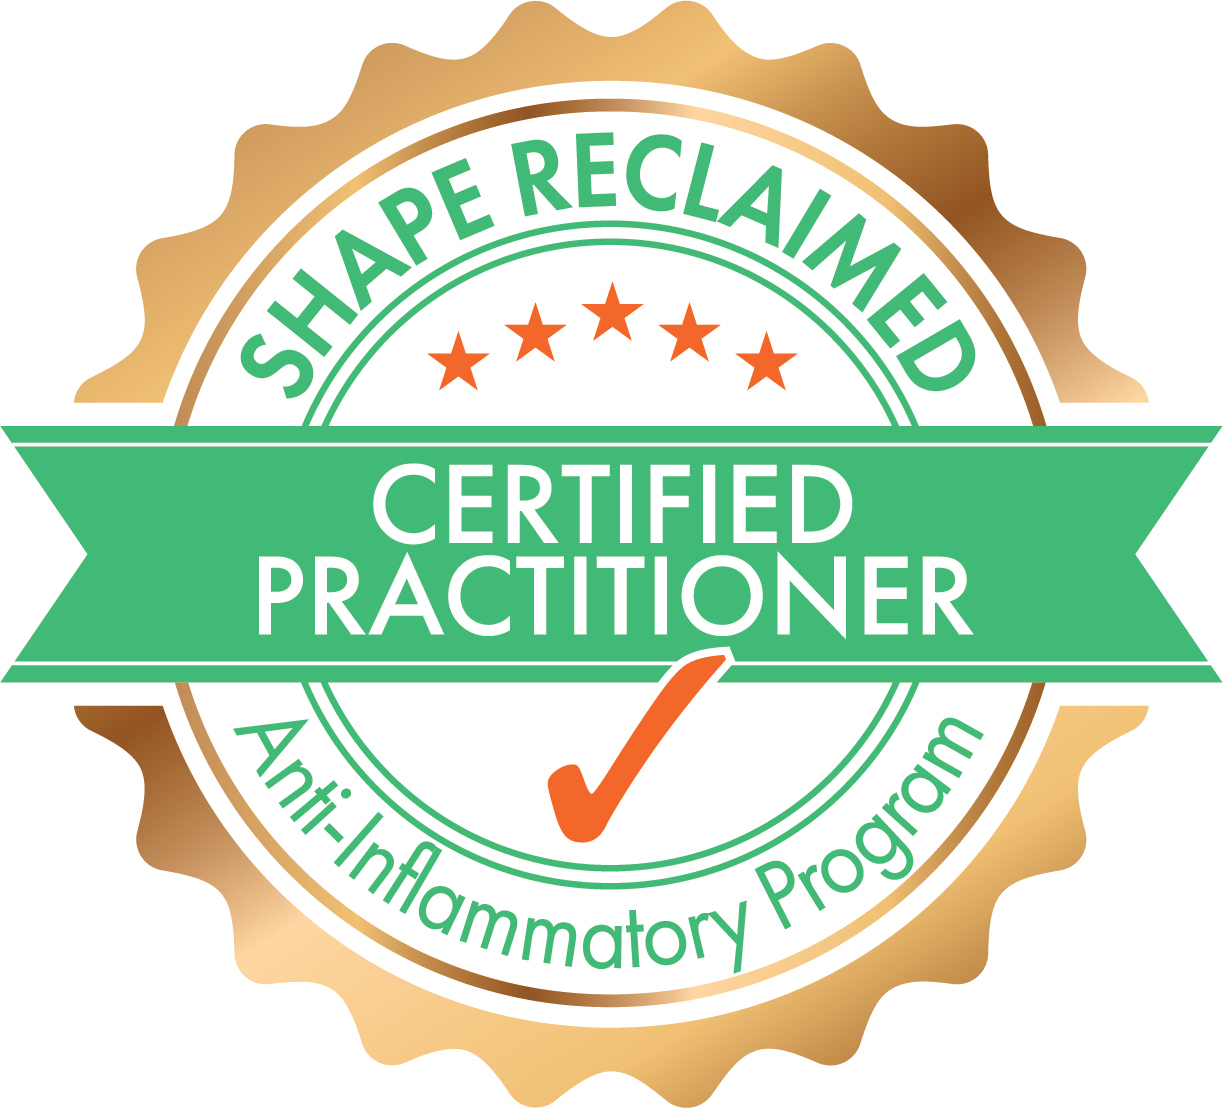 Certified Practitioner Seal (1)